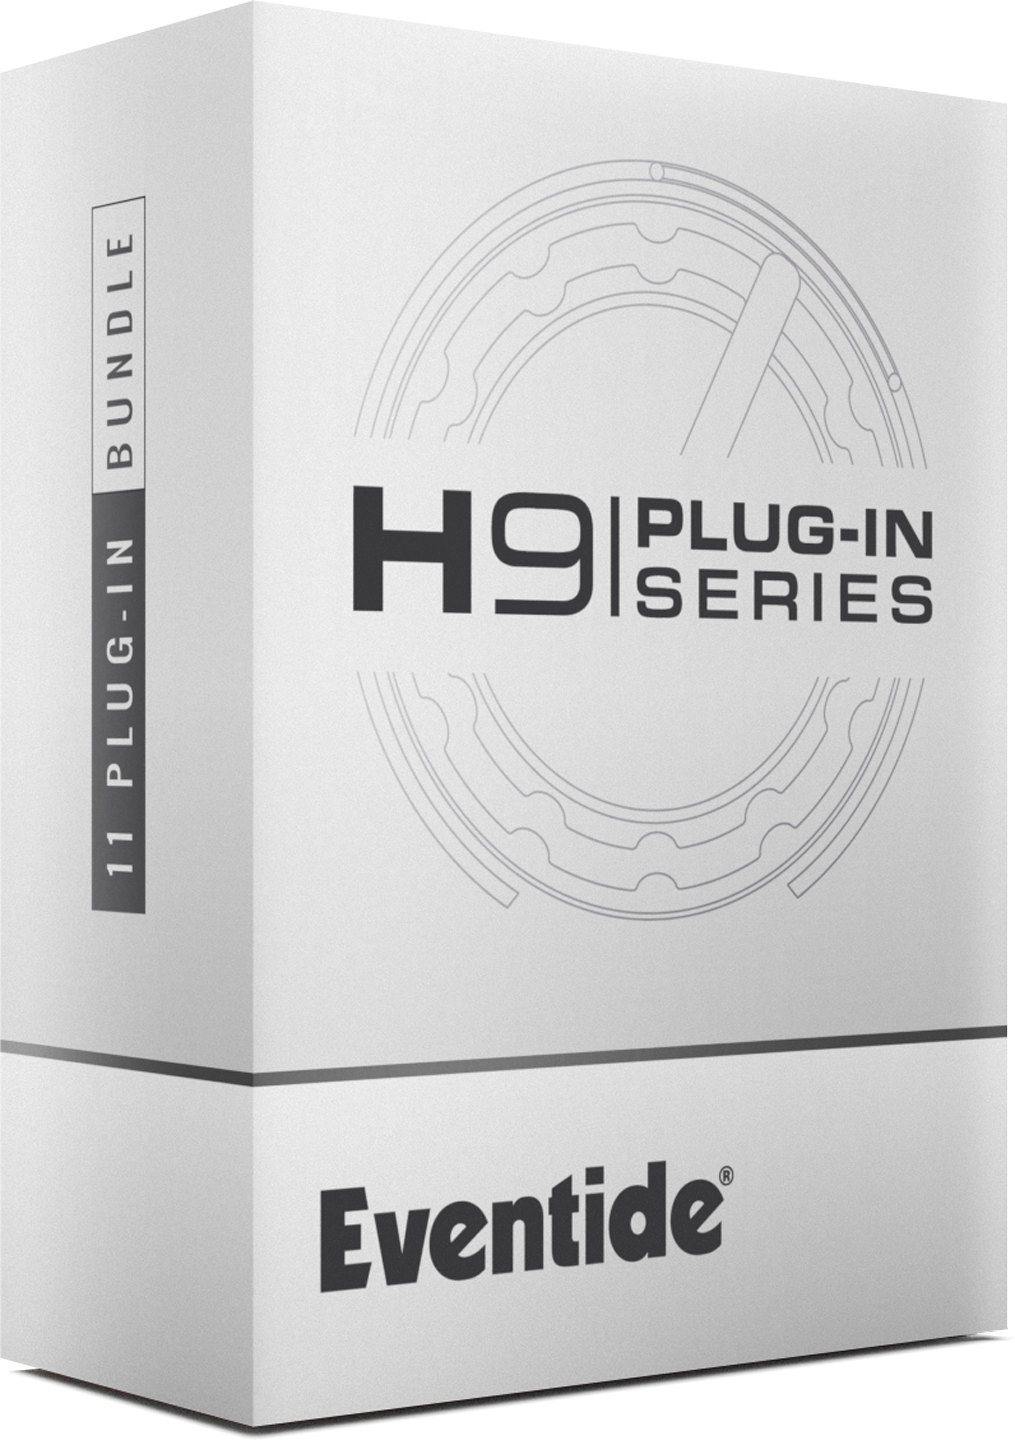 Eventide | H9 Plug-In Series Bundle Plug-in Collection